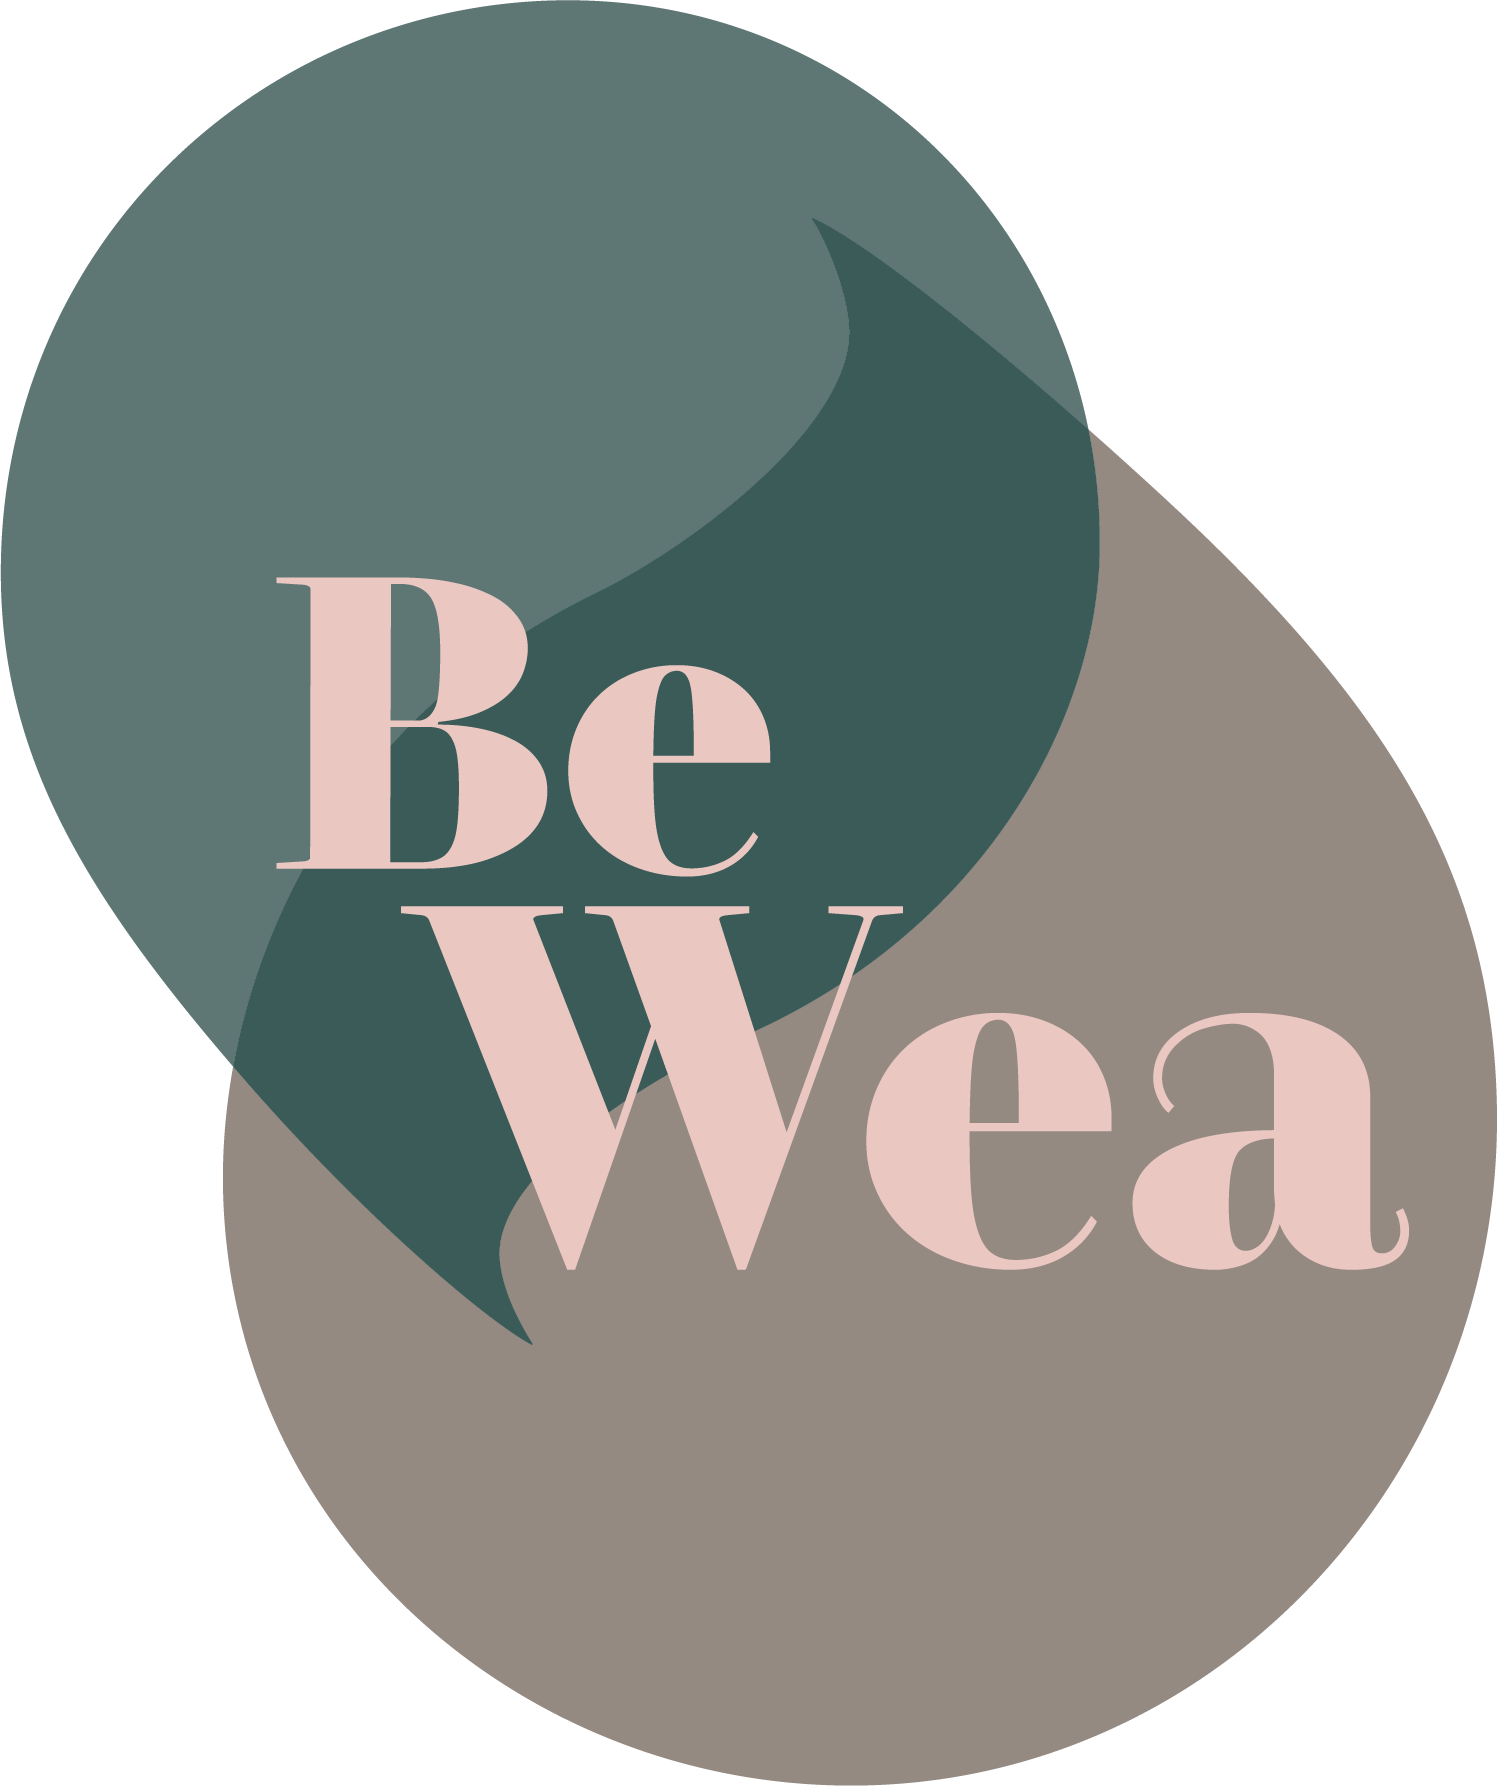 BeWea - Together For Better Weather Coupon Codes